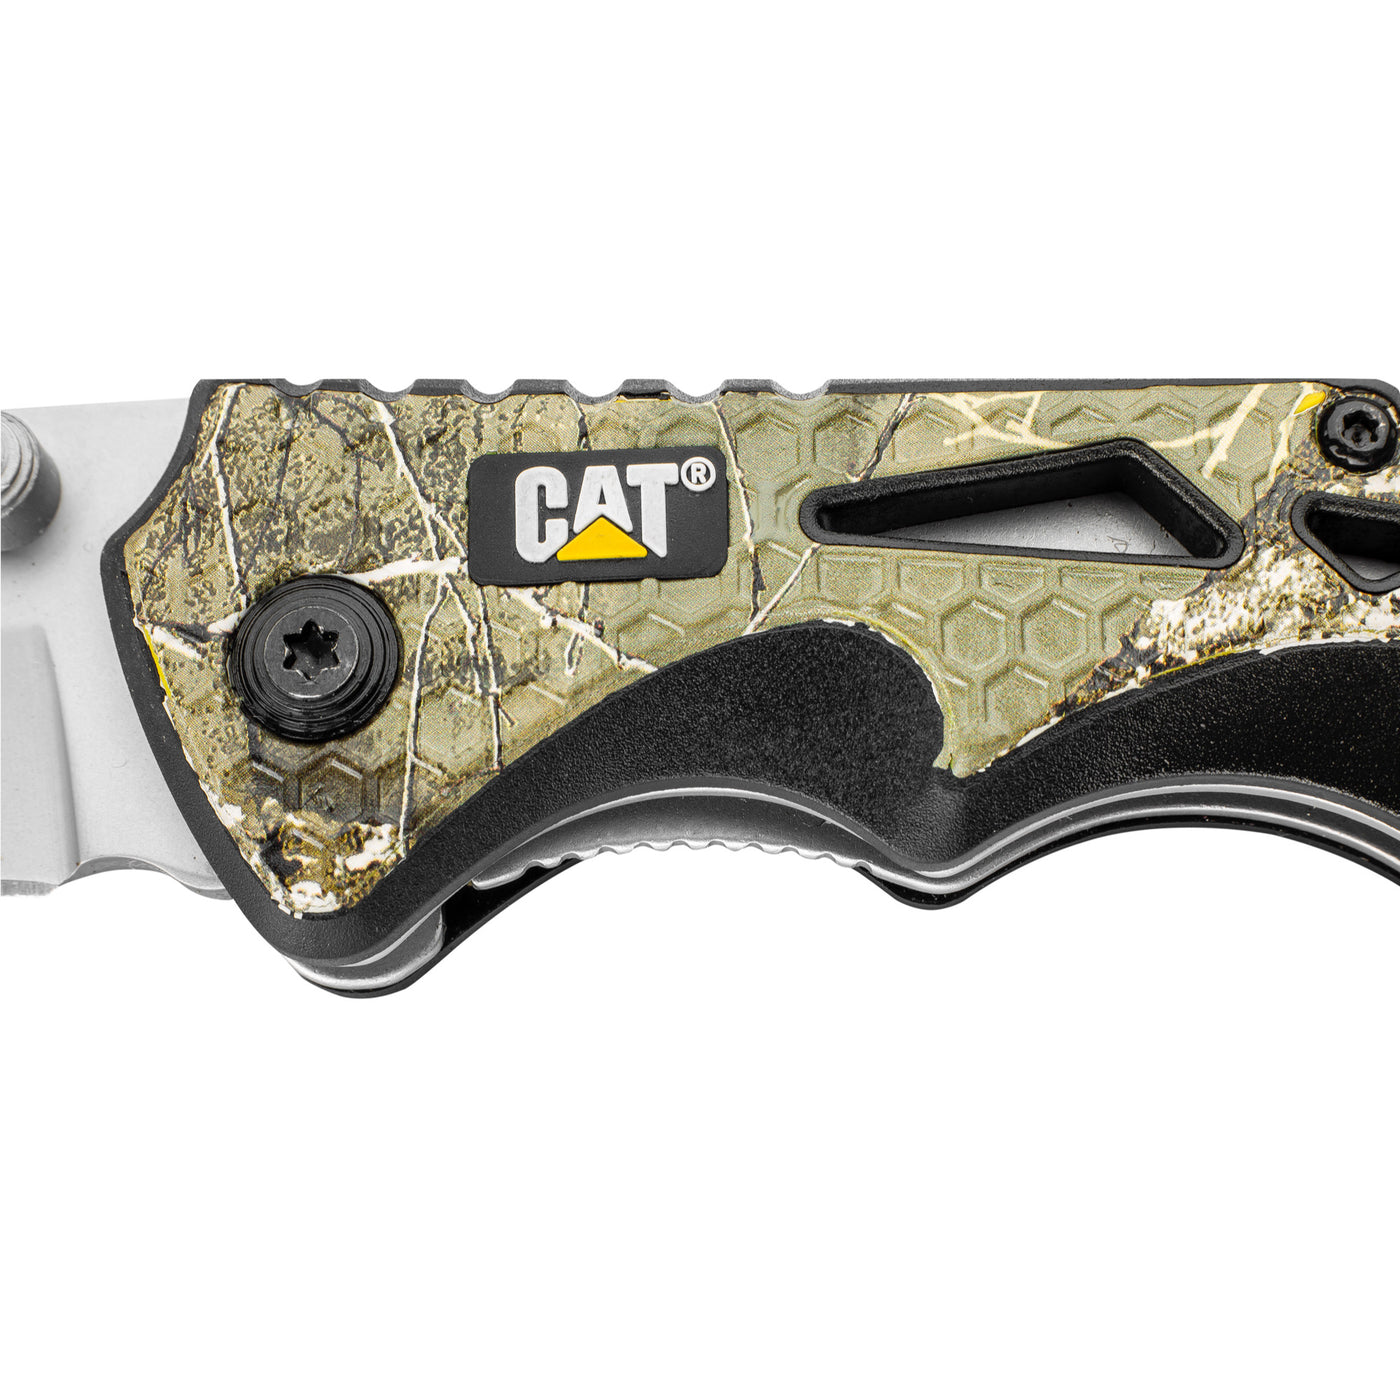 Cat / Real Tree 2 Piece Multi-Tool and Knife Gift Box Set with Real Tree Camo - 240358